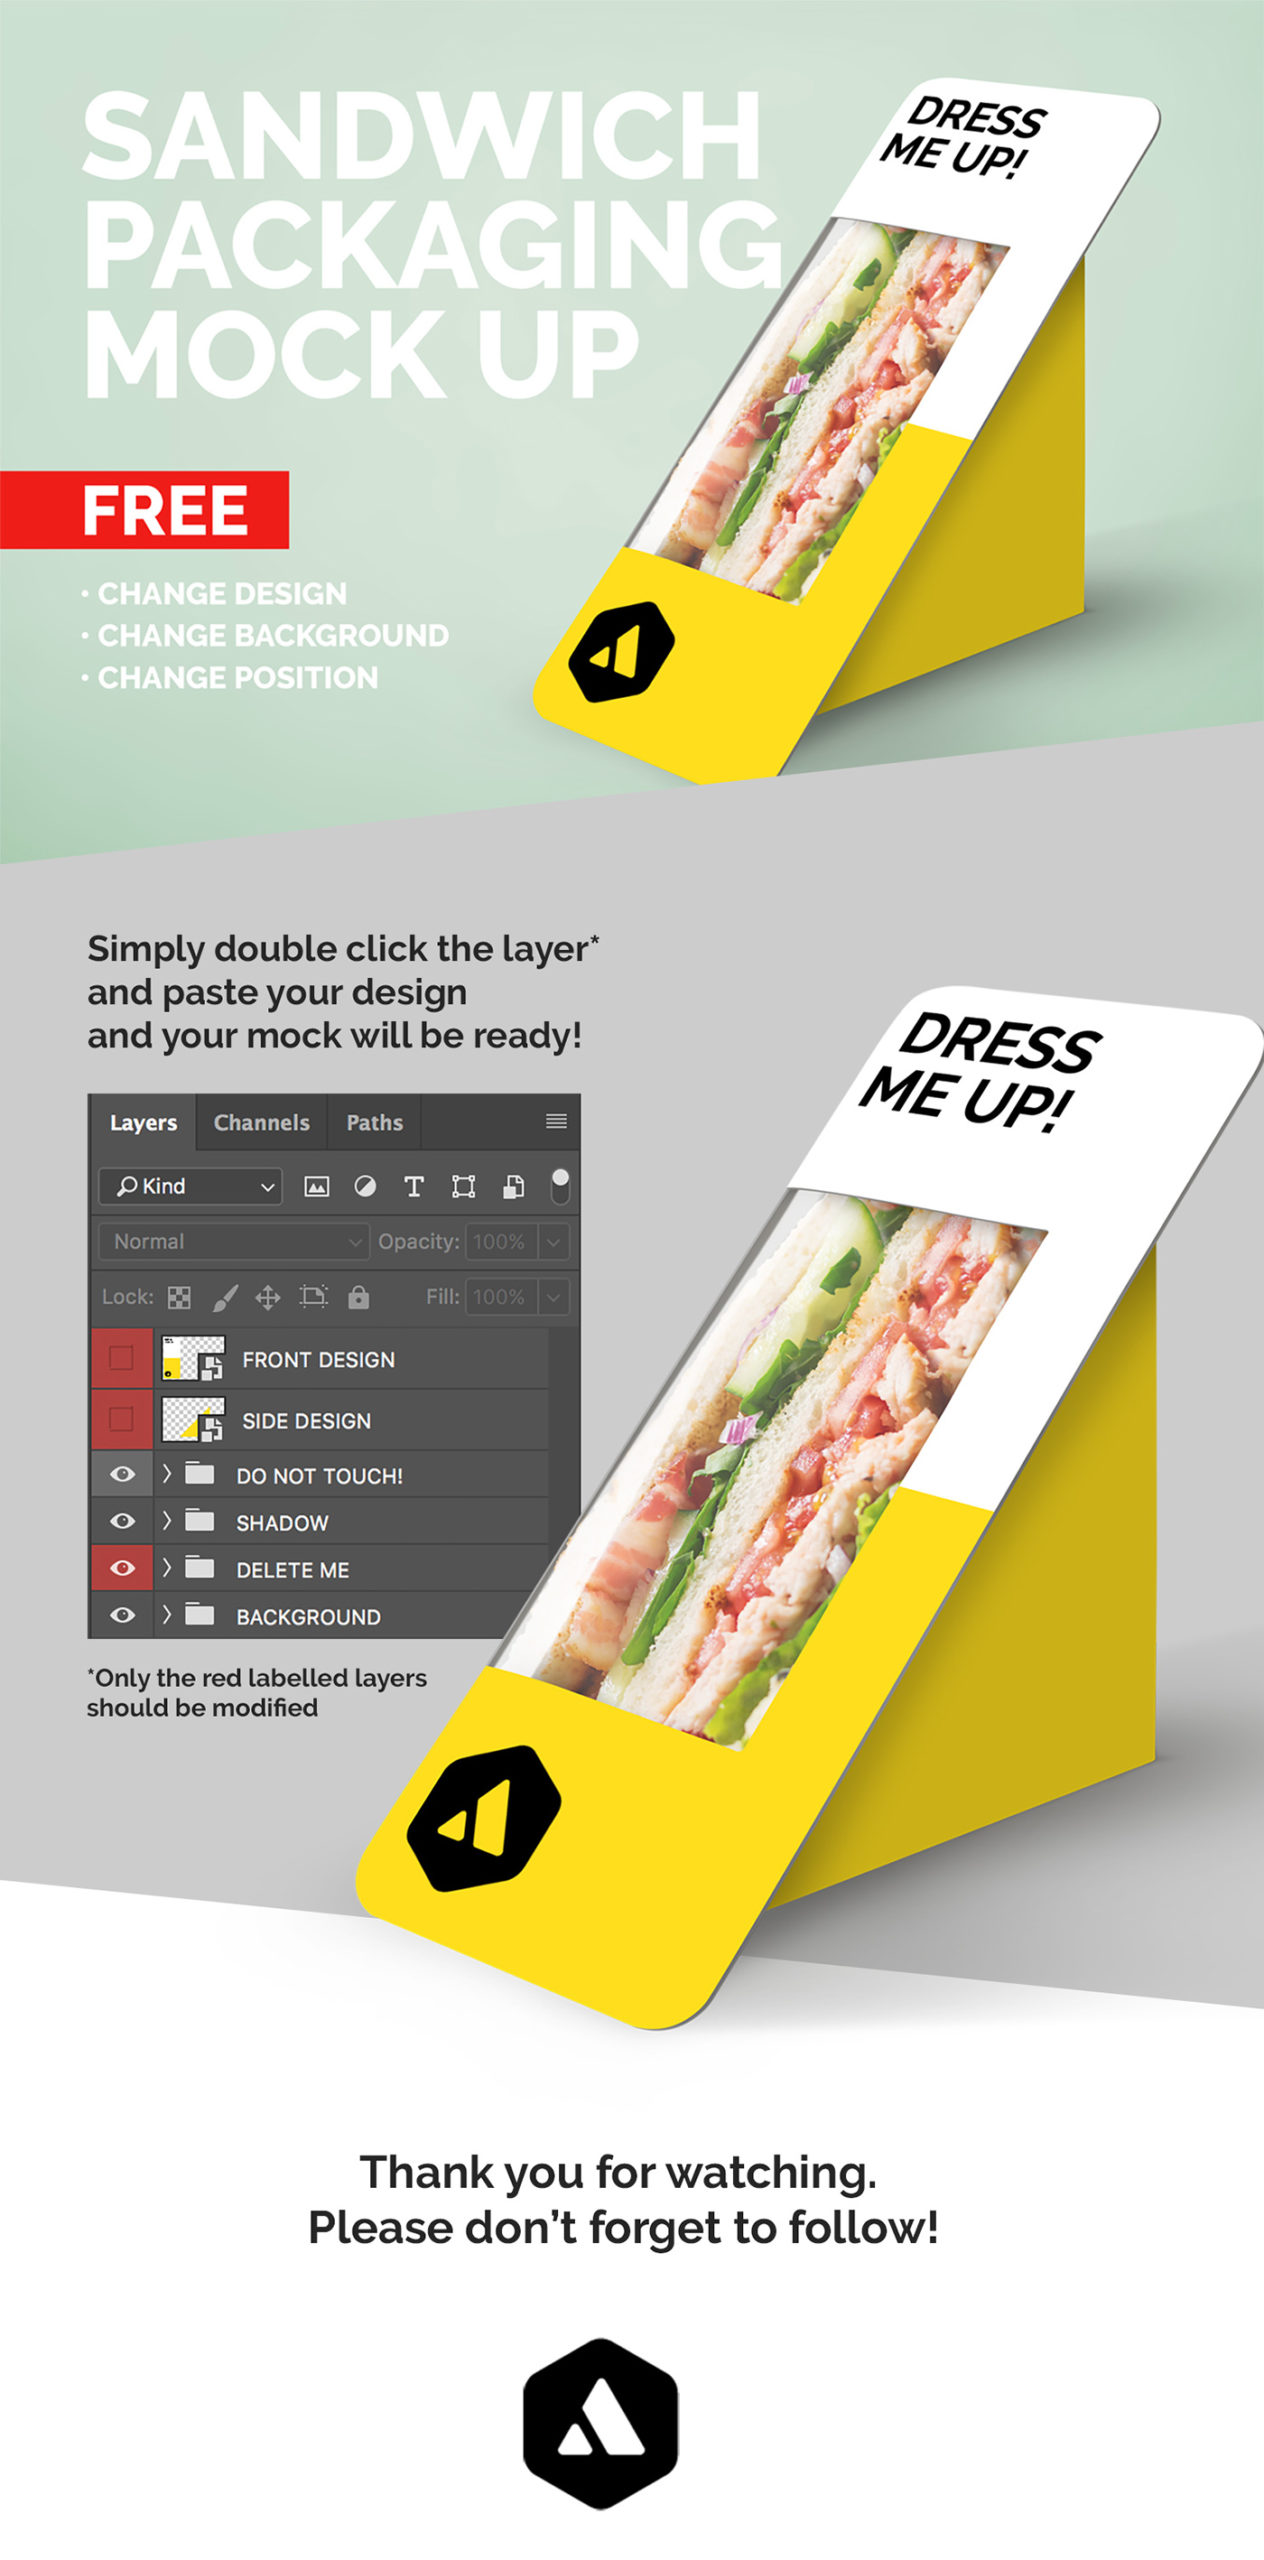 Triangular free packaging mockup made specifically for the sandwich